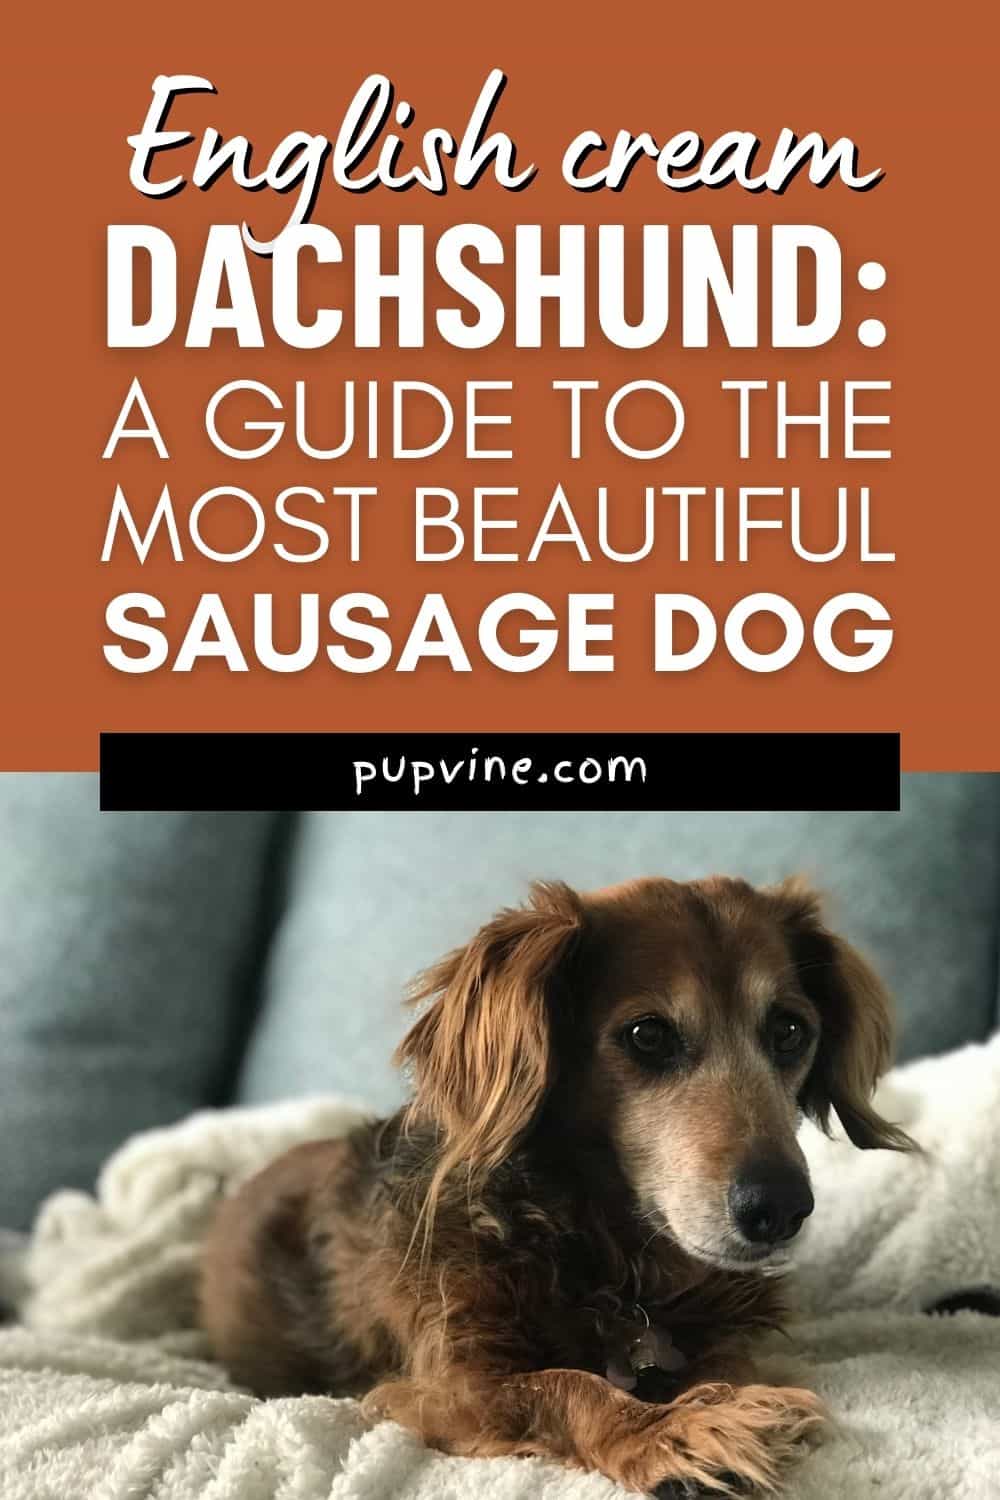 English Cream Dachshund - A Guide To The Most Beautiful Sausage Dog